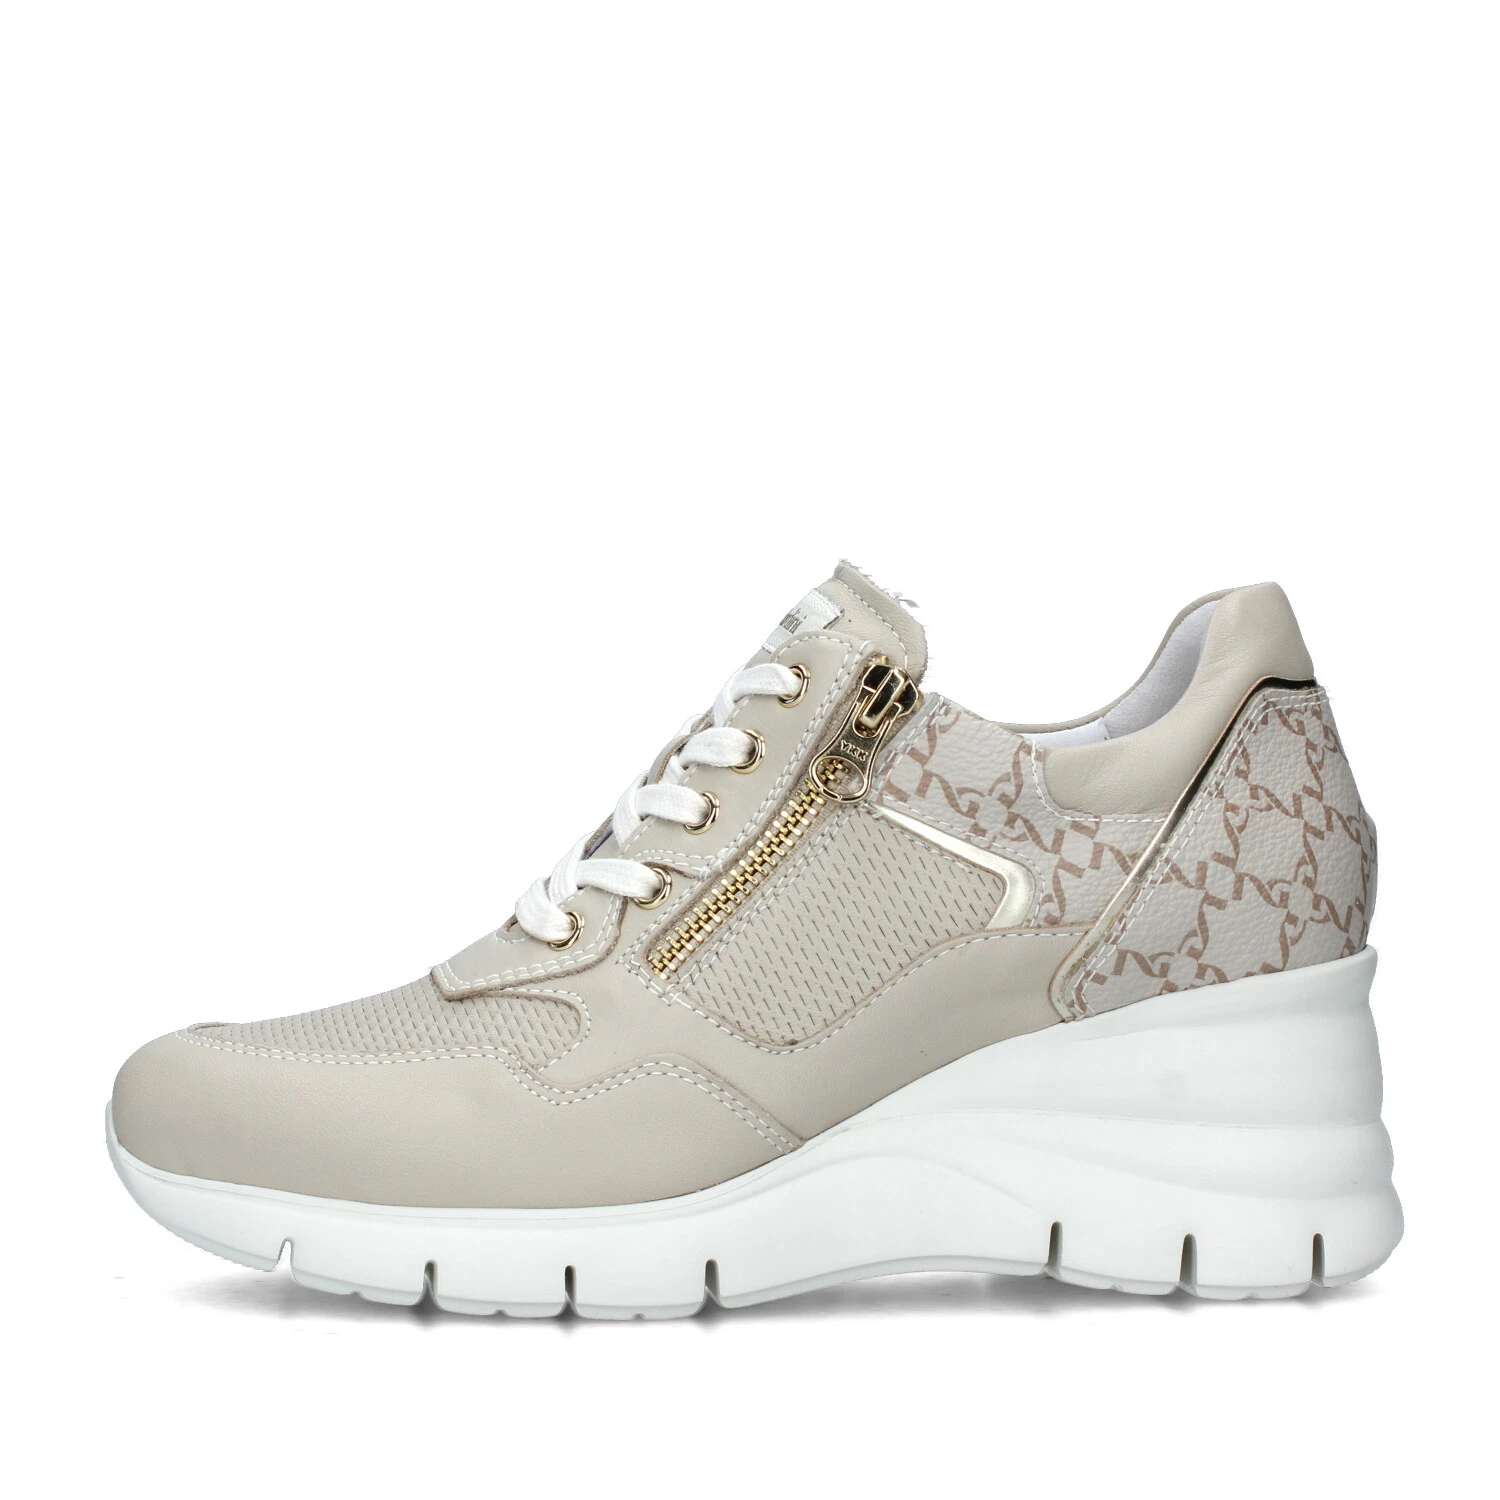 SNEAKERS PLATFORM CON TRAMA NG DONNA BEIGE ORO